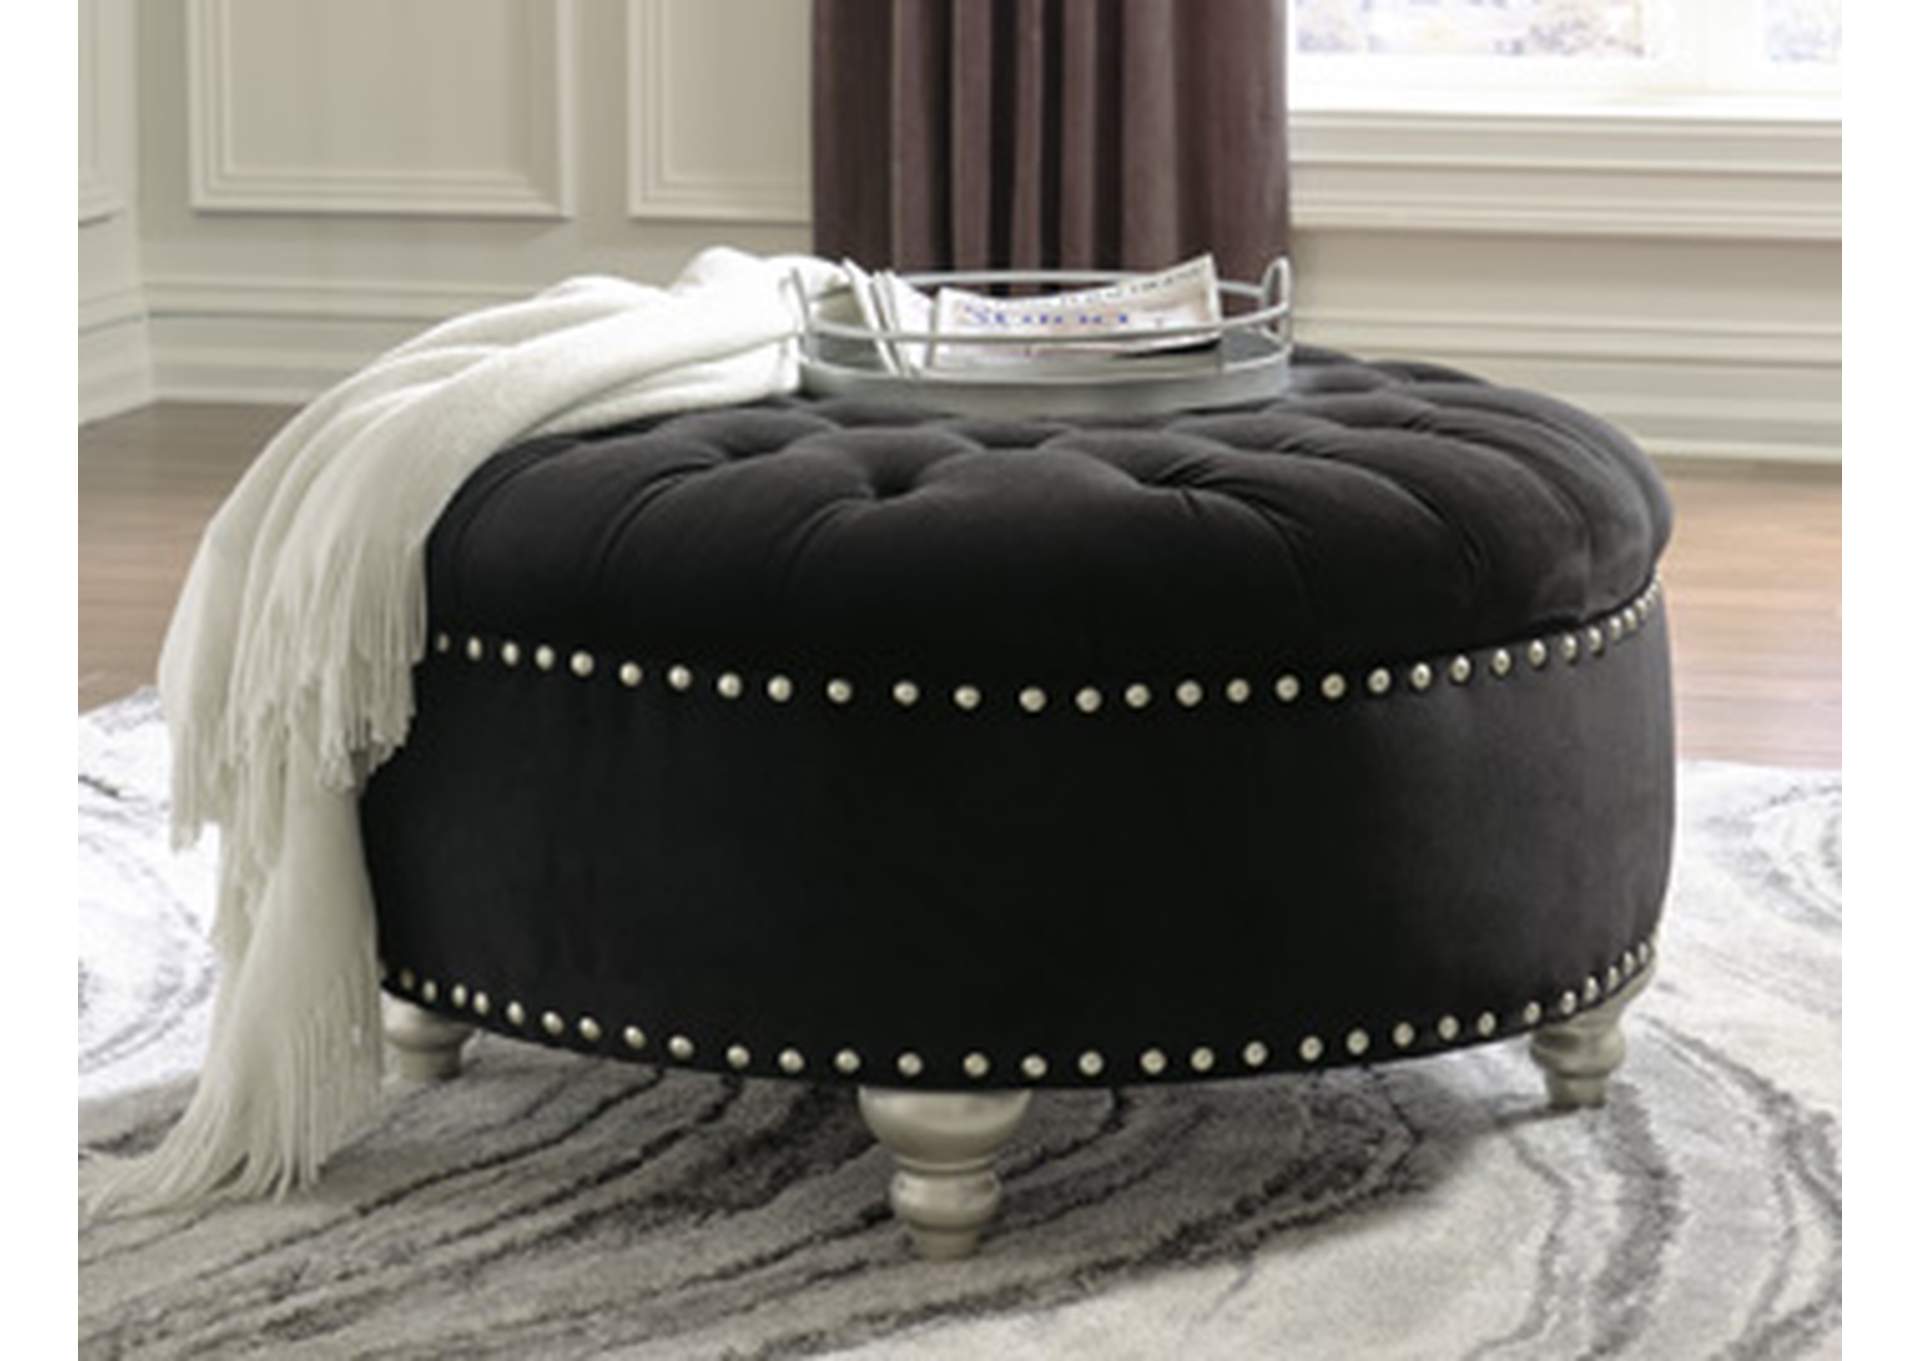 Harriotte Oversized Accent Ottoman,Signature Design By Ashley